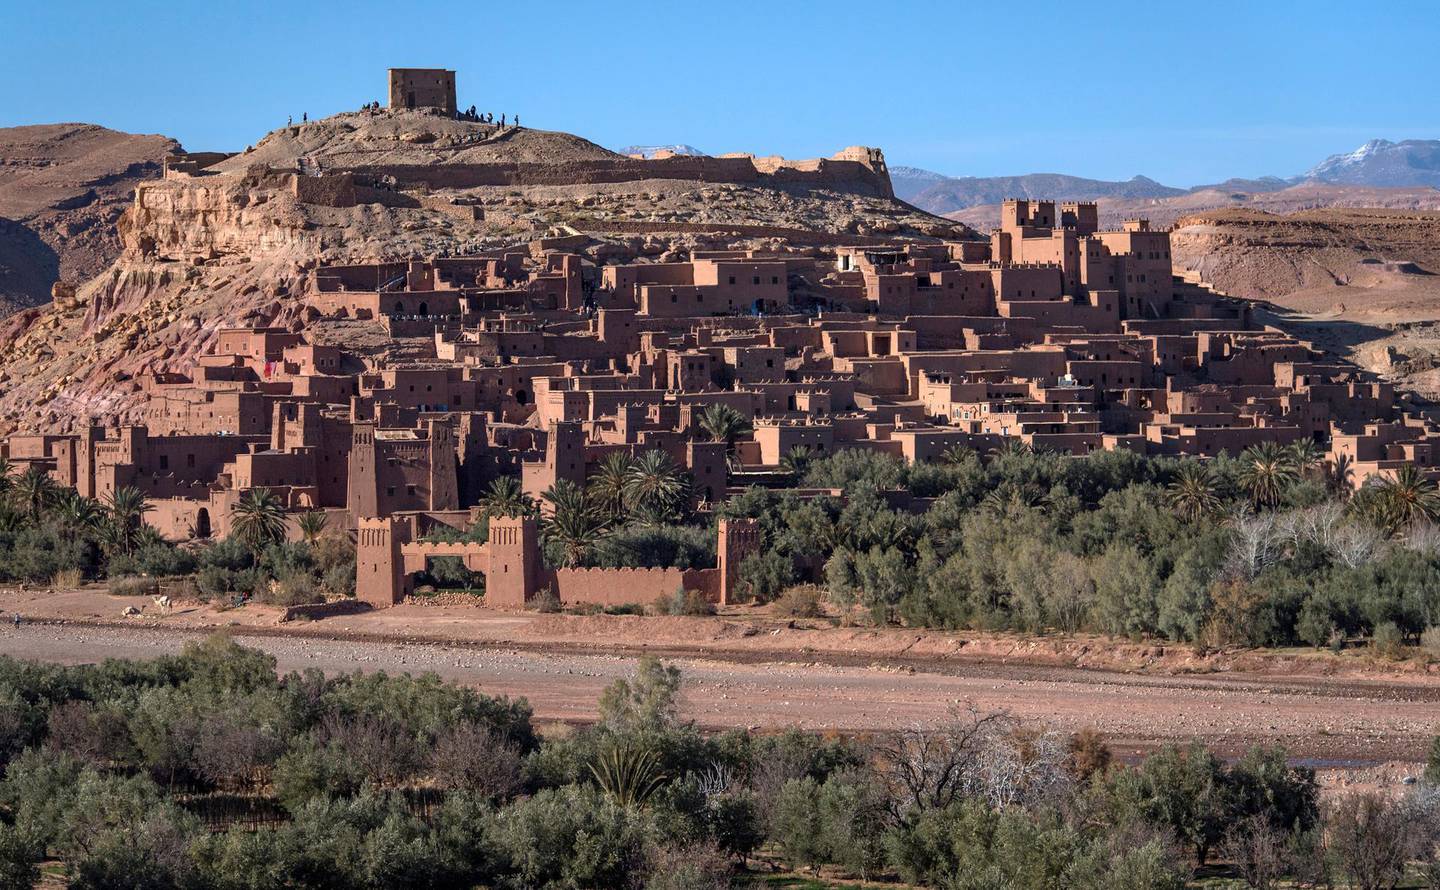 This picture taken on January 27, 2020 shows a view of the Kasbah (ancient fortress) of Ait-Ben-Haddou, where scenes depicting the fictional city of Yunkai from the hit HBO television series "Game of Thrones" were filmed, about 32 kilometres northwest of the city of Ouarzazate south of Morocco's High Atlas mountains. - Millions worldwide may have seen the desert fortress in the hit fantasy series "Game of Thrones", but few know they can visit Morocco's kasbah Ait-Ben-Haddou -- where locals hope more fans might visit. The fortified city at the foot of the majestic Atlas mountains enchanted global audiences in the epic HBO series and also served as a dusty backdrop in Ridley Scott's swords-and-sandals epic "Gladiator". (Photo by FADEL SENNA / AFP)